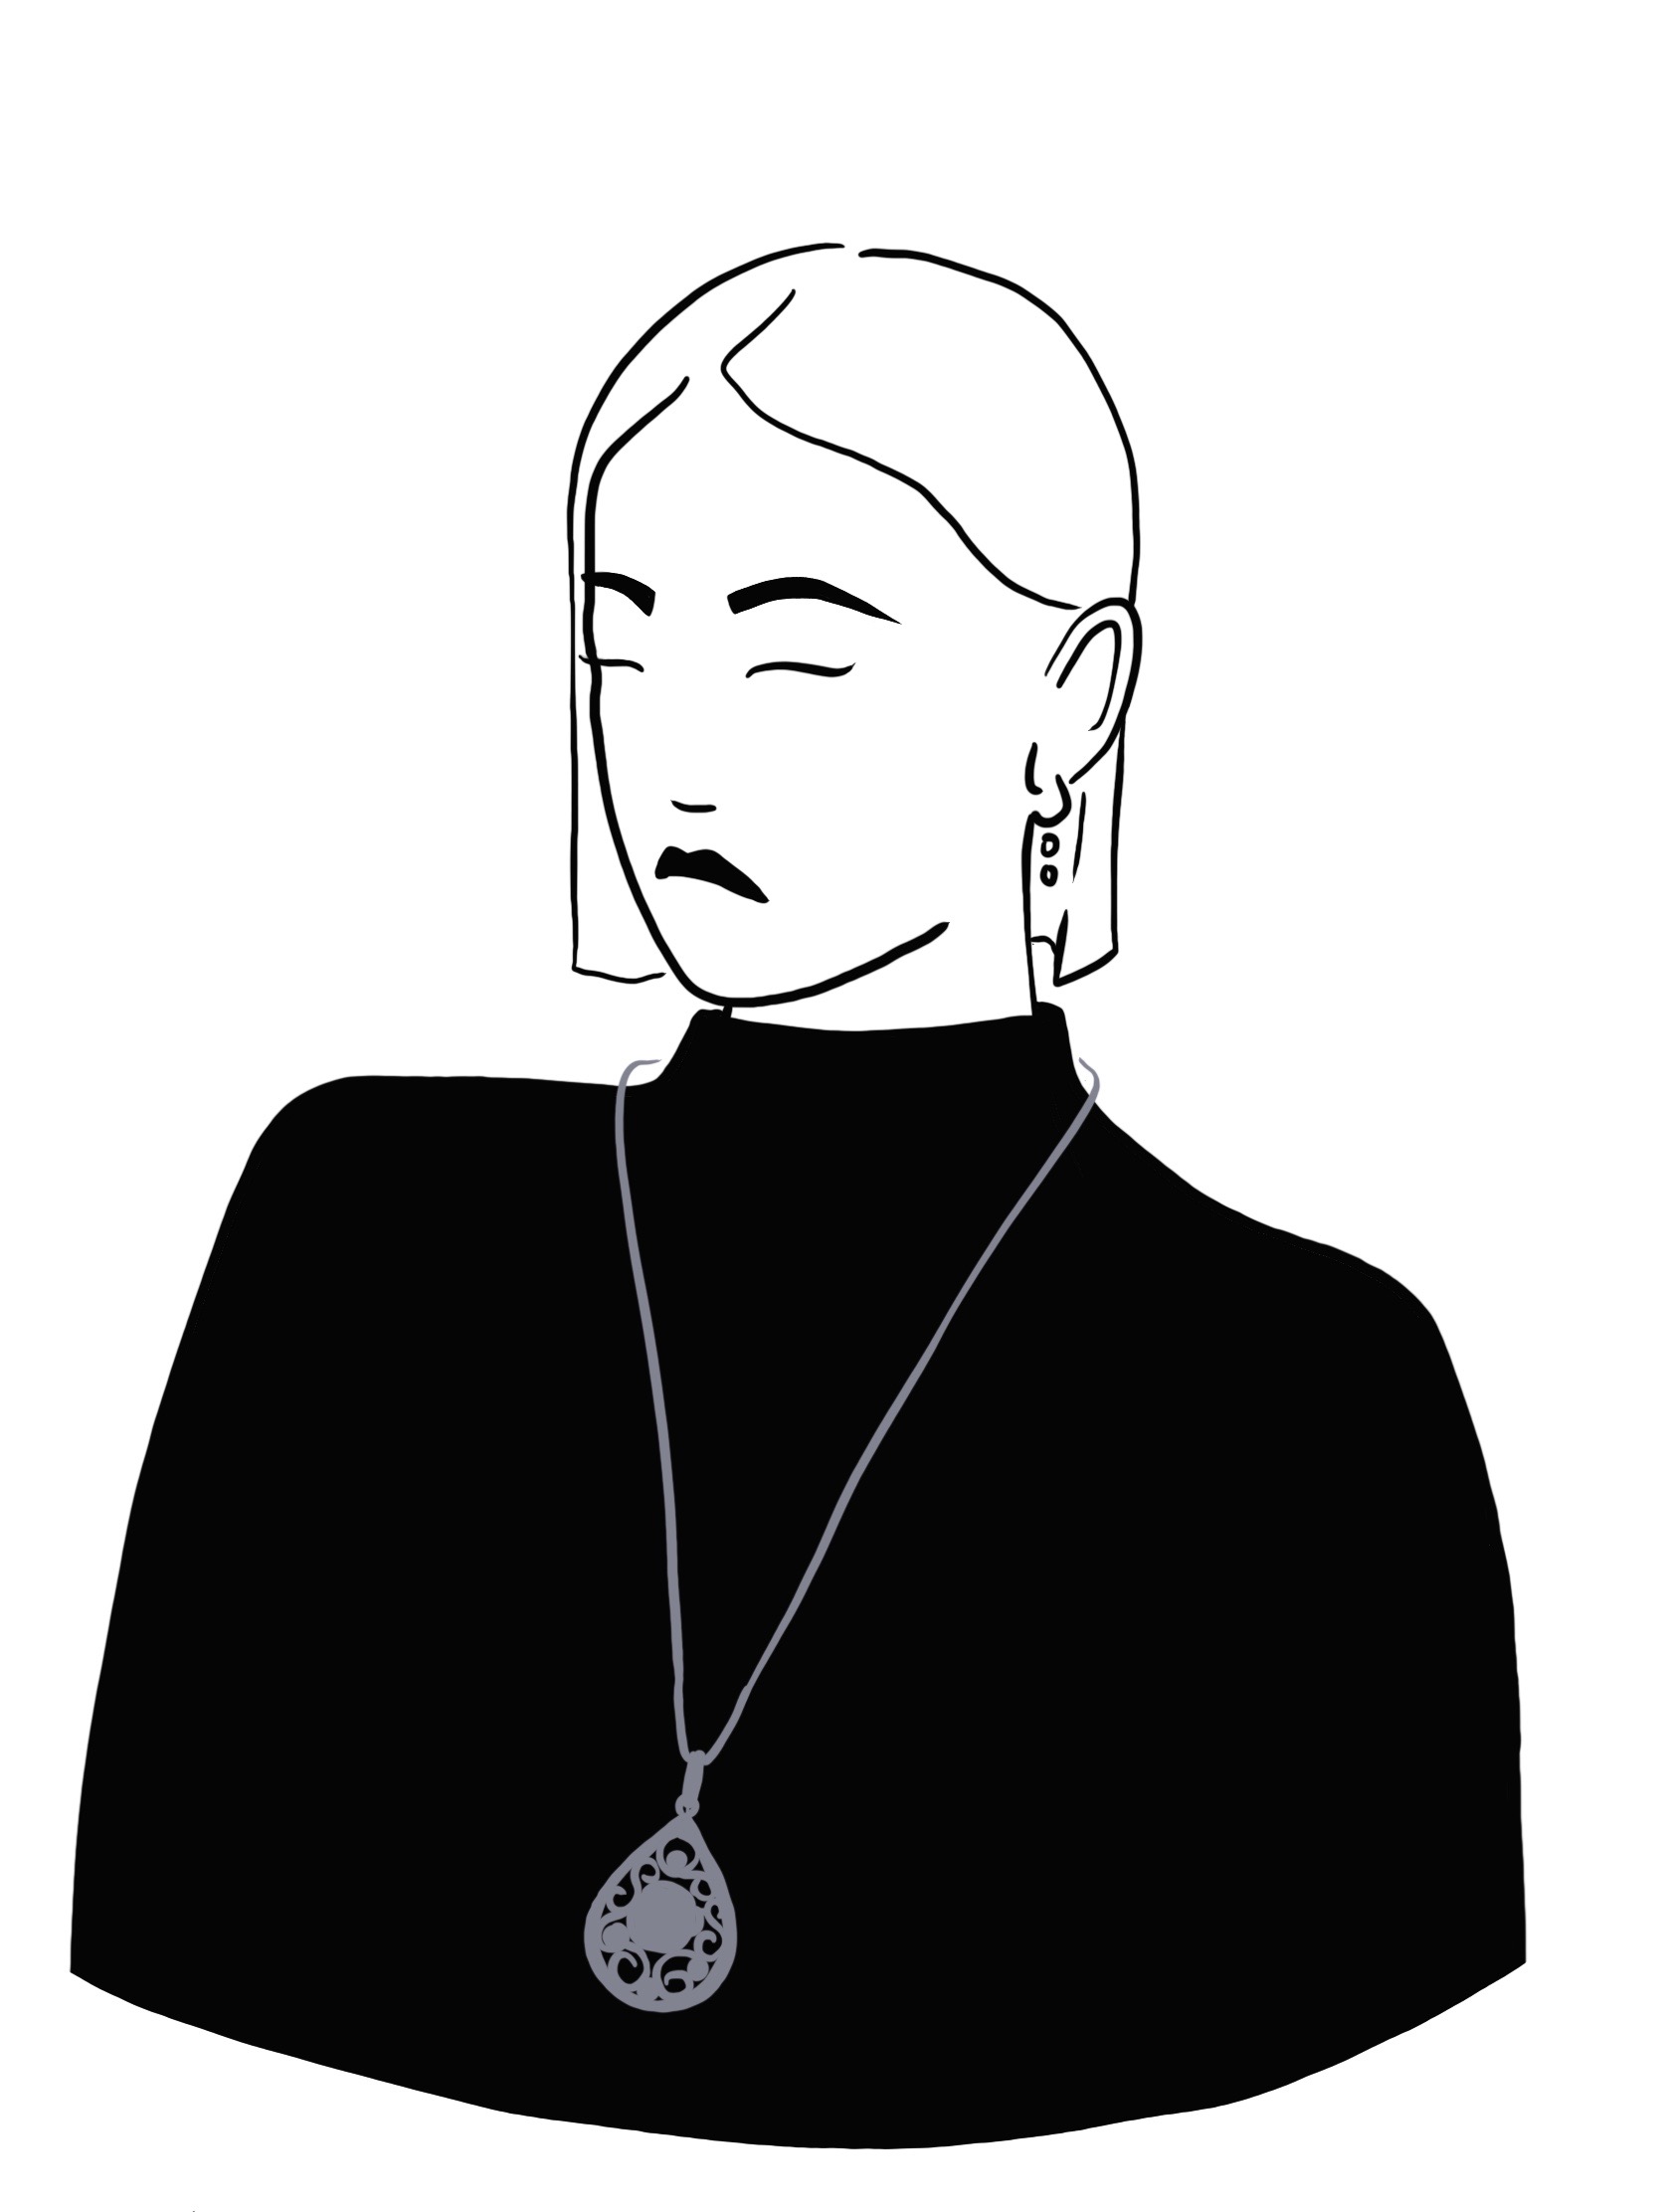 Line drawing illustration of a chic woman with a french bob in a black mock turtleneck with an ornate pendant on a long chain.